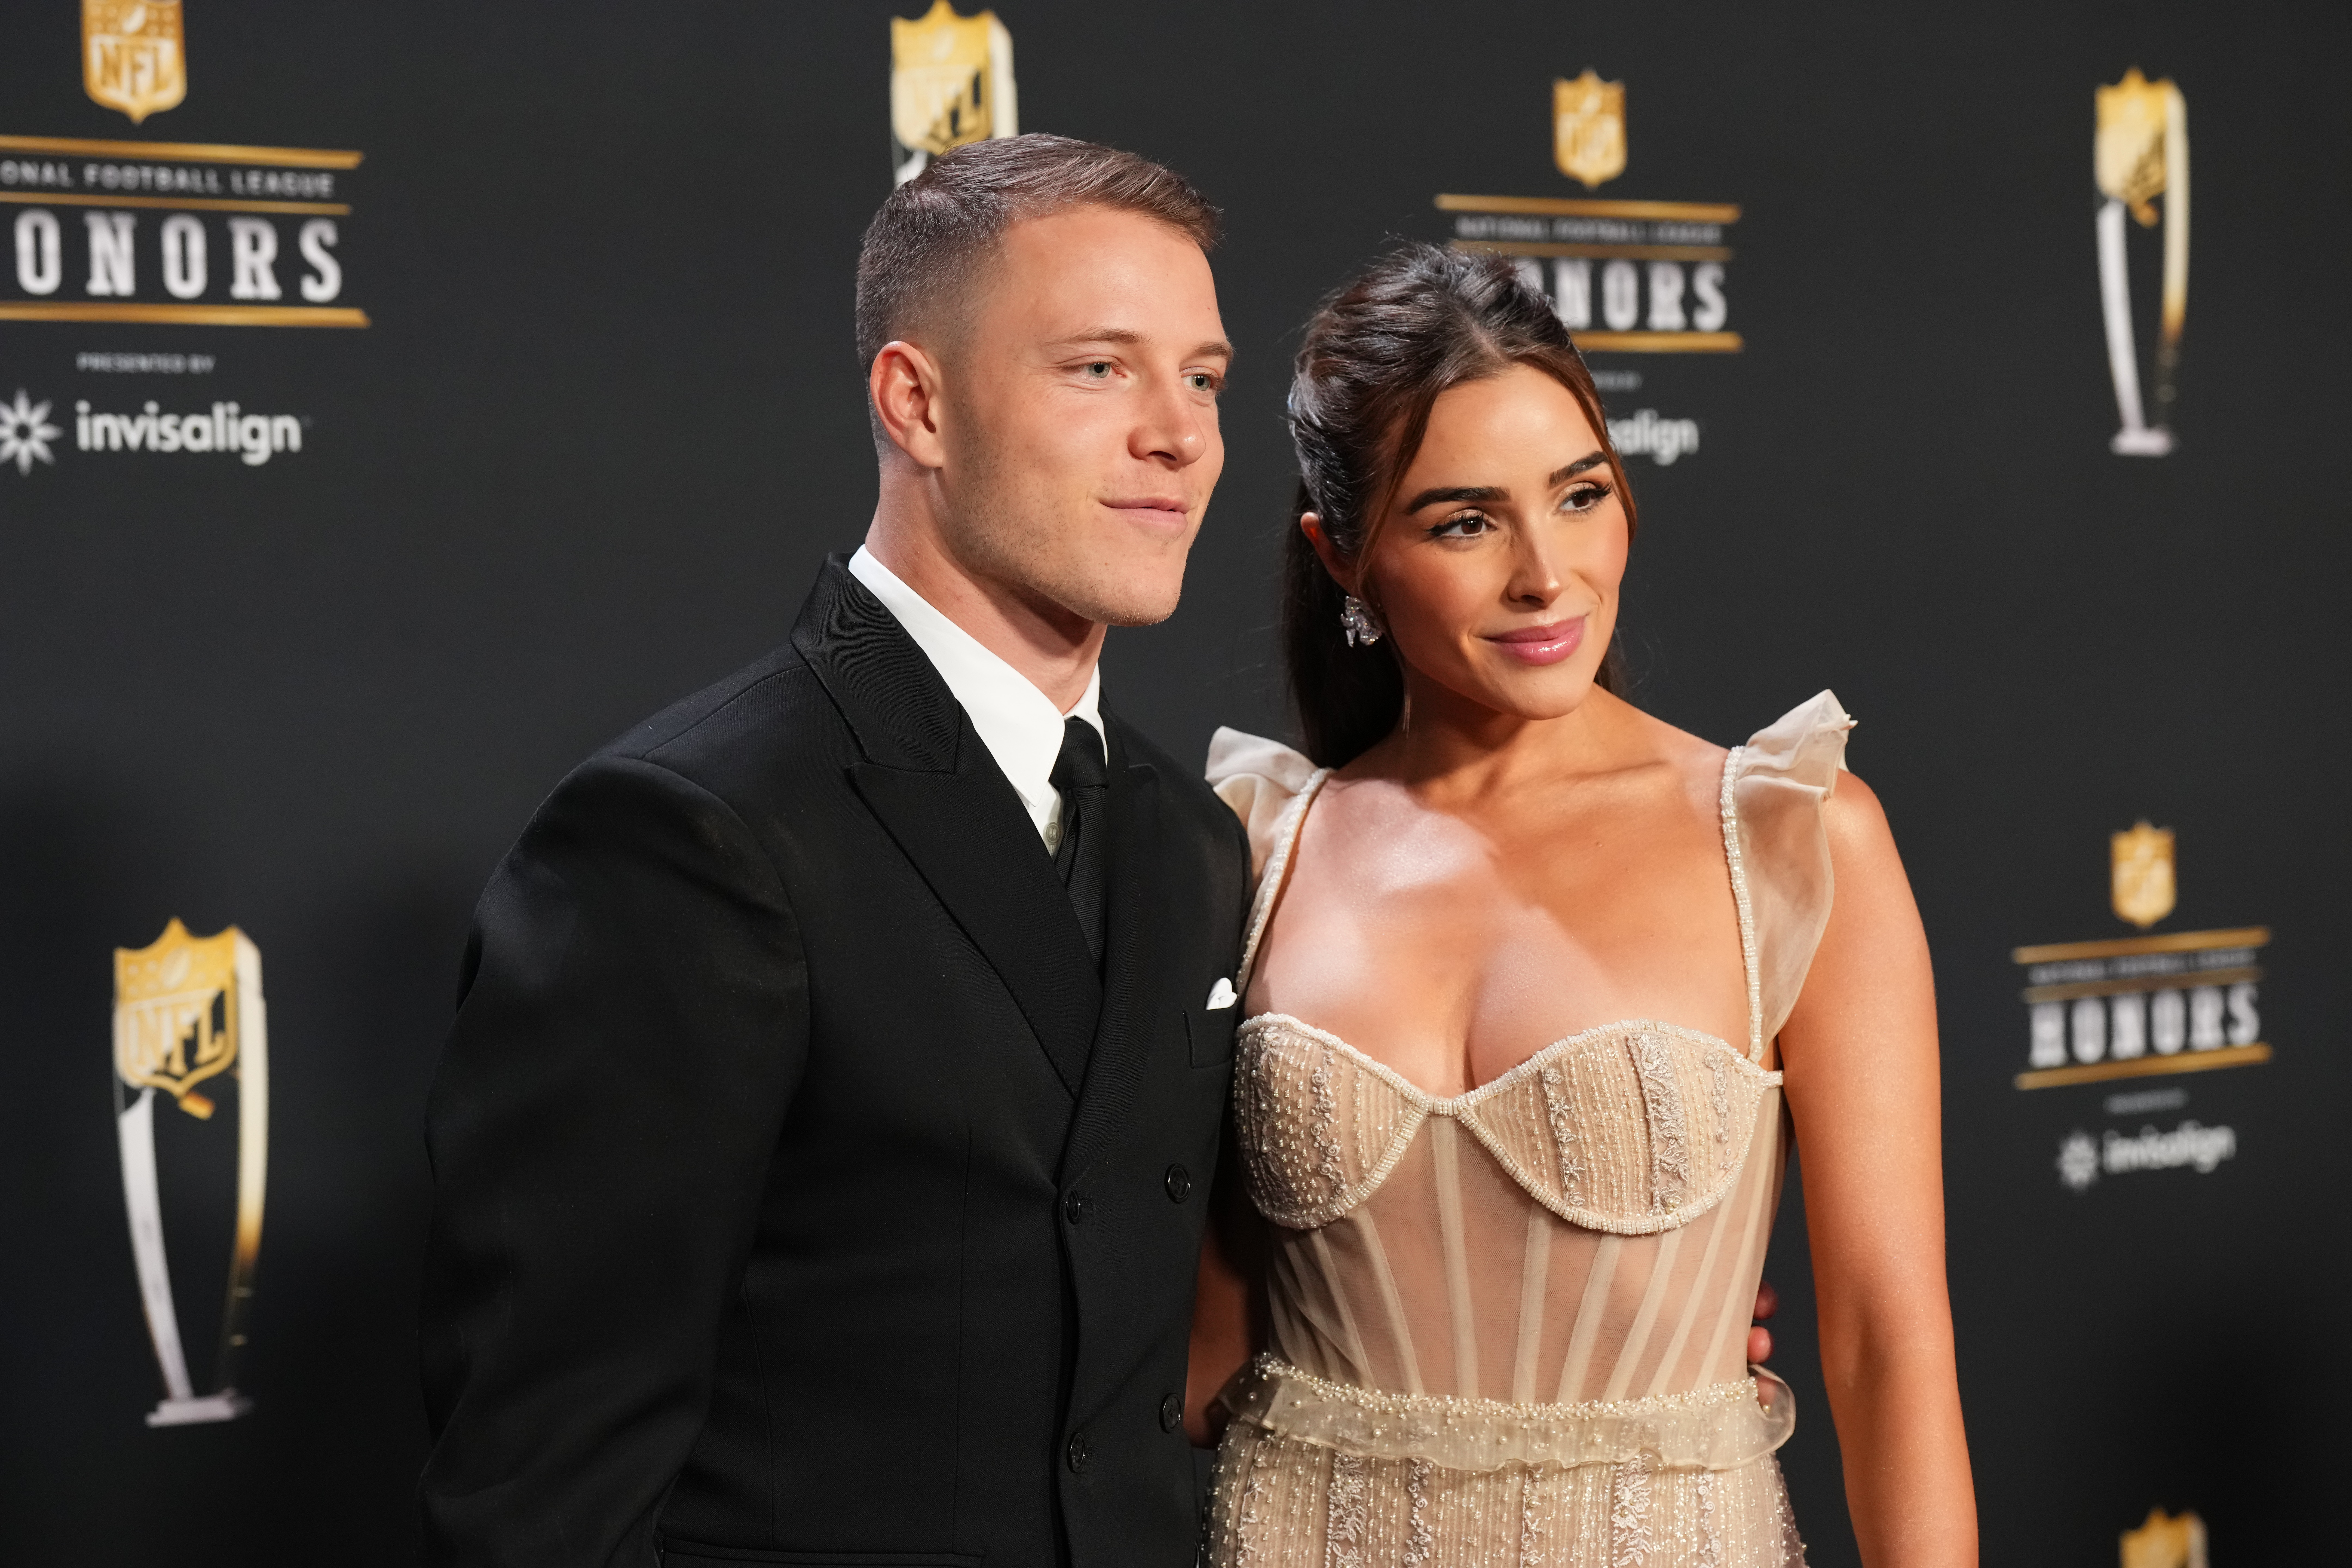 PHOENIX, AZ - FEBRUARY 09: Christian McCaffrey and Olivia Culpo pose for a photo on the red carpet during NFL Honors at the Symphony Hall on February 9, 2023 in Phoenix, Arizona. (Photo by Cooper Neill/Getty Images)